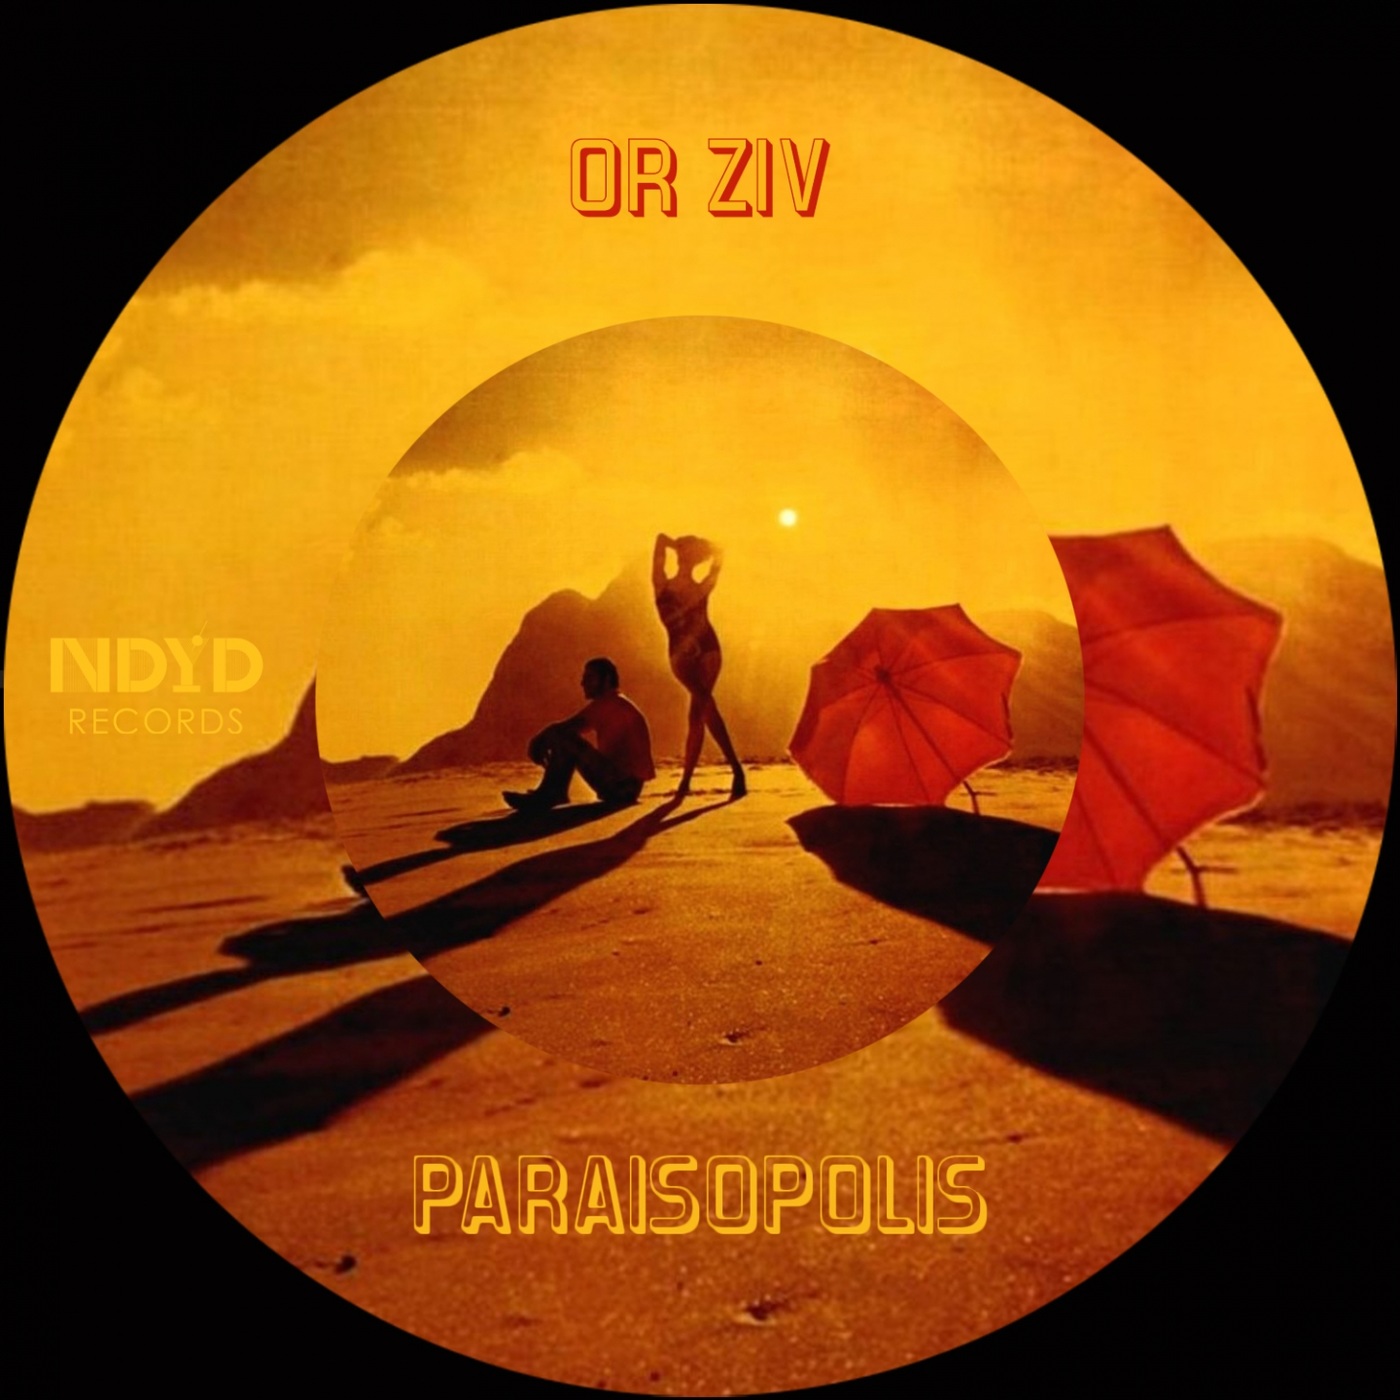 Or Ziv - Paraisopolis / Ndyd Records